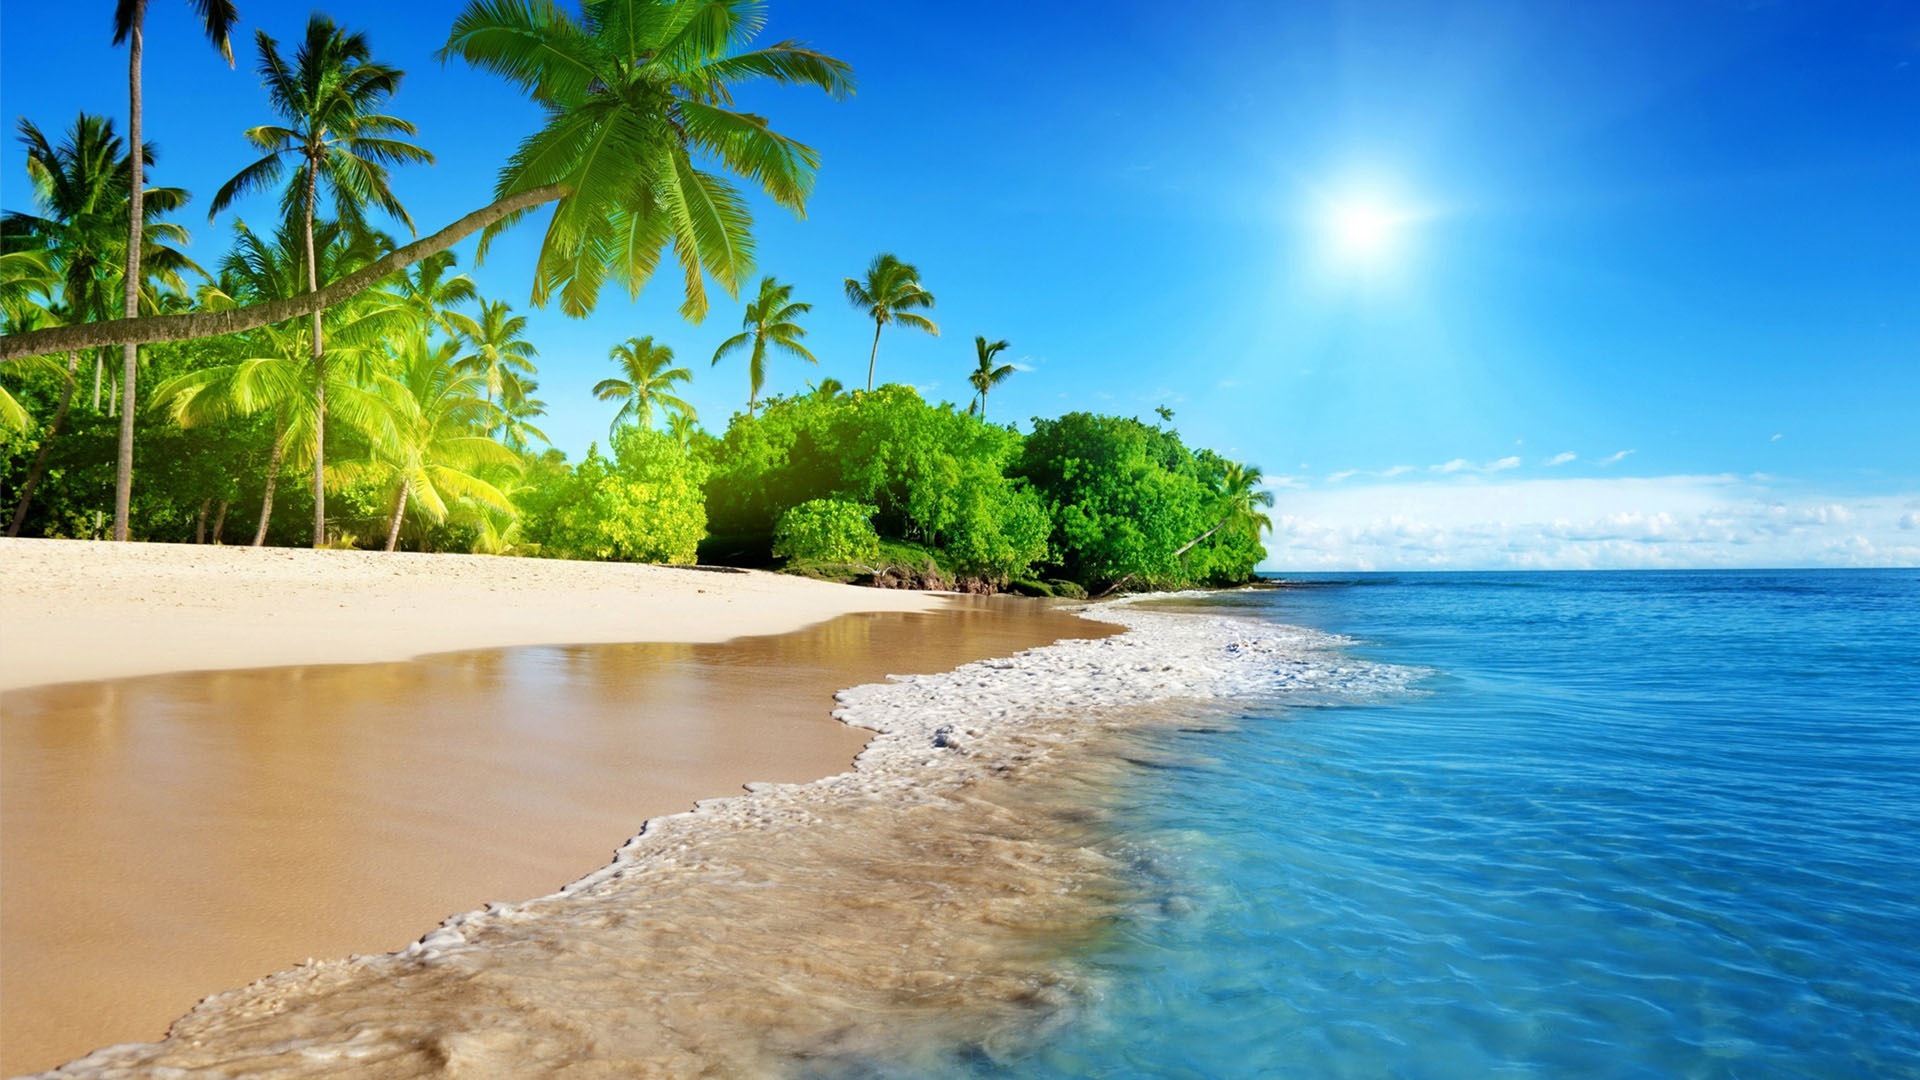 Awesome beach backgrounds